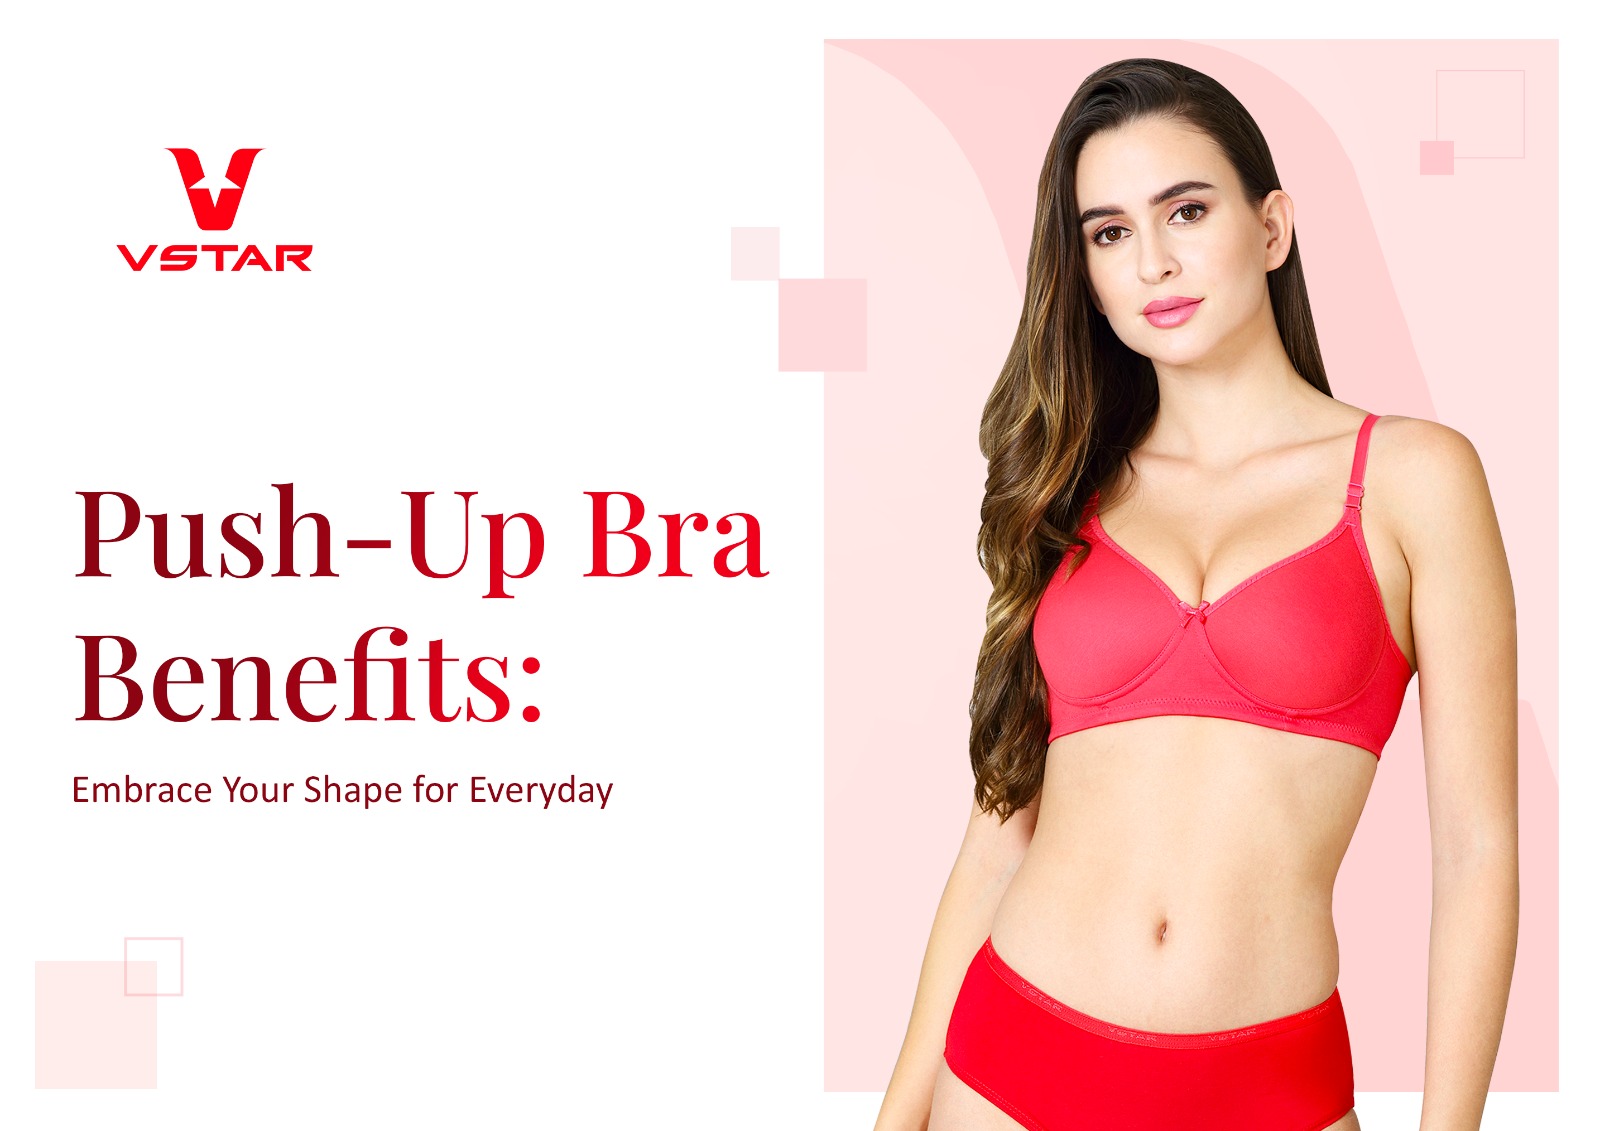 34 C, 34 B, and 34 D Bra Cup Sizes: Are They Confusing?